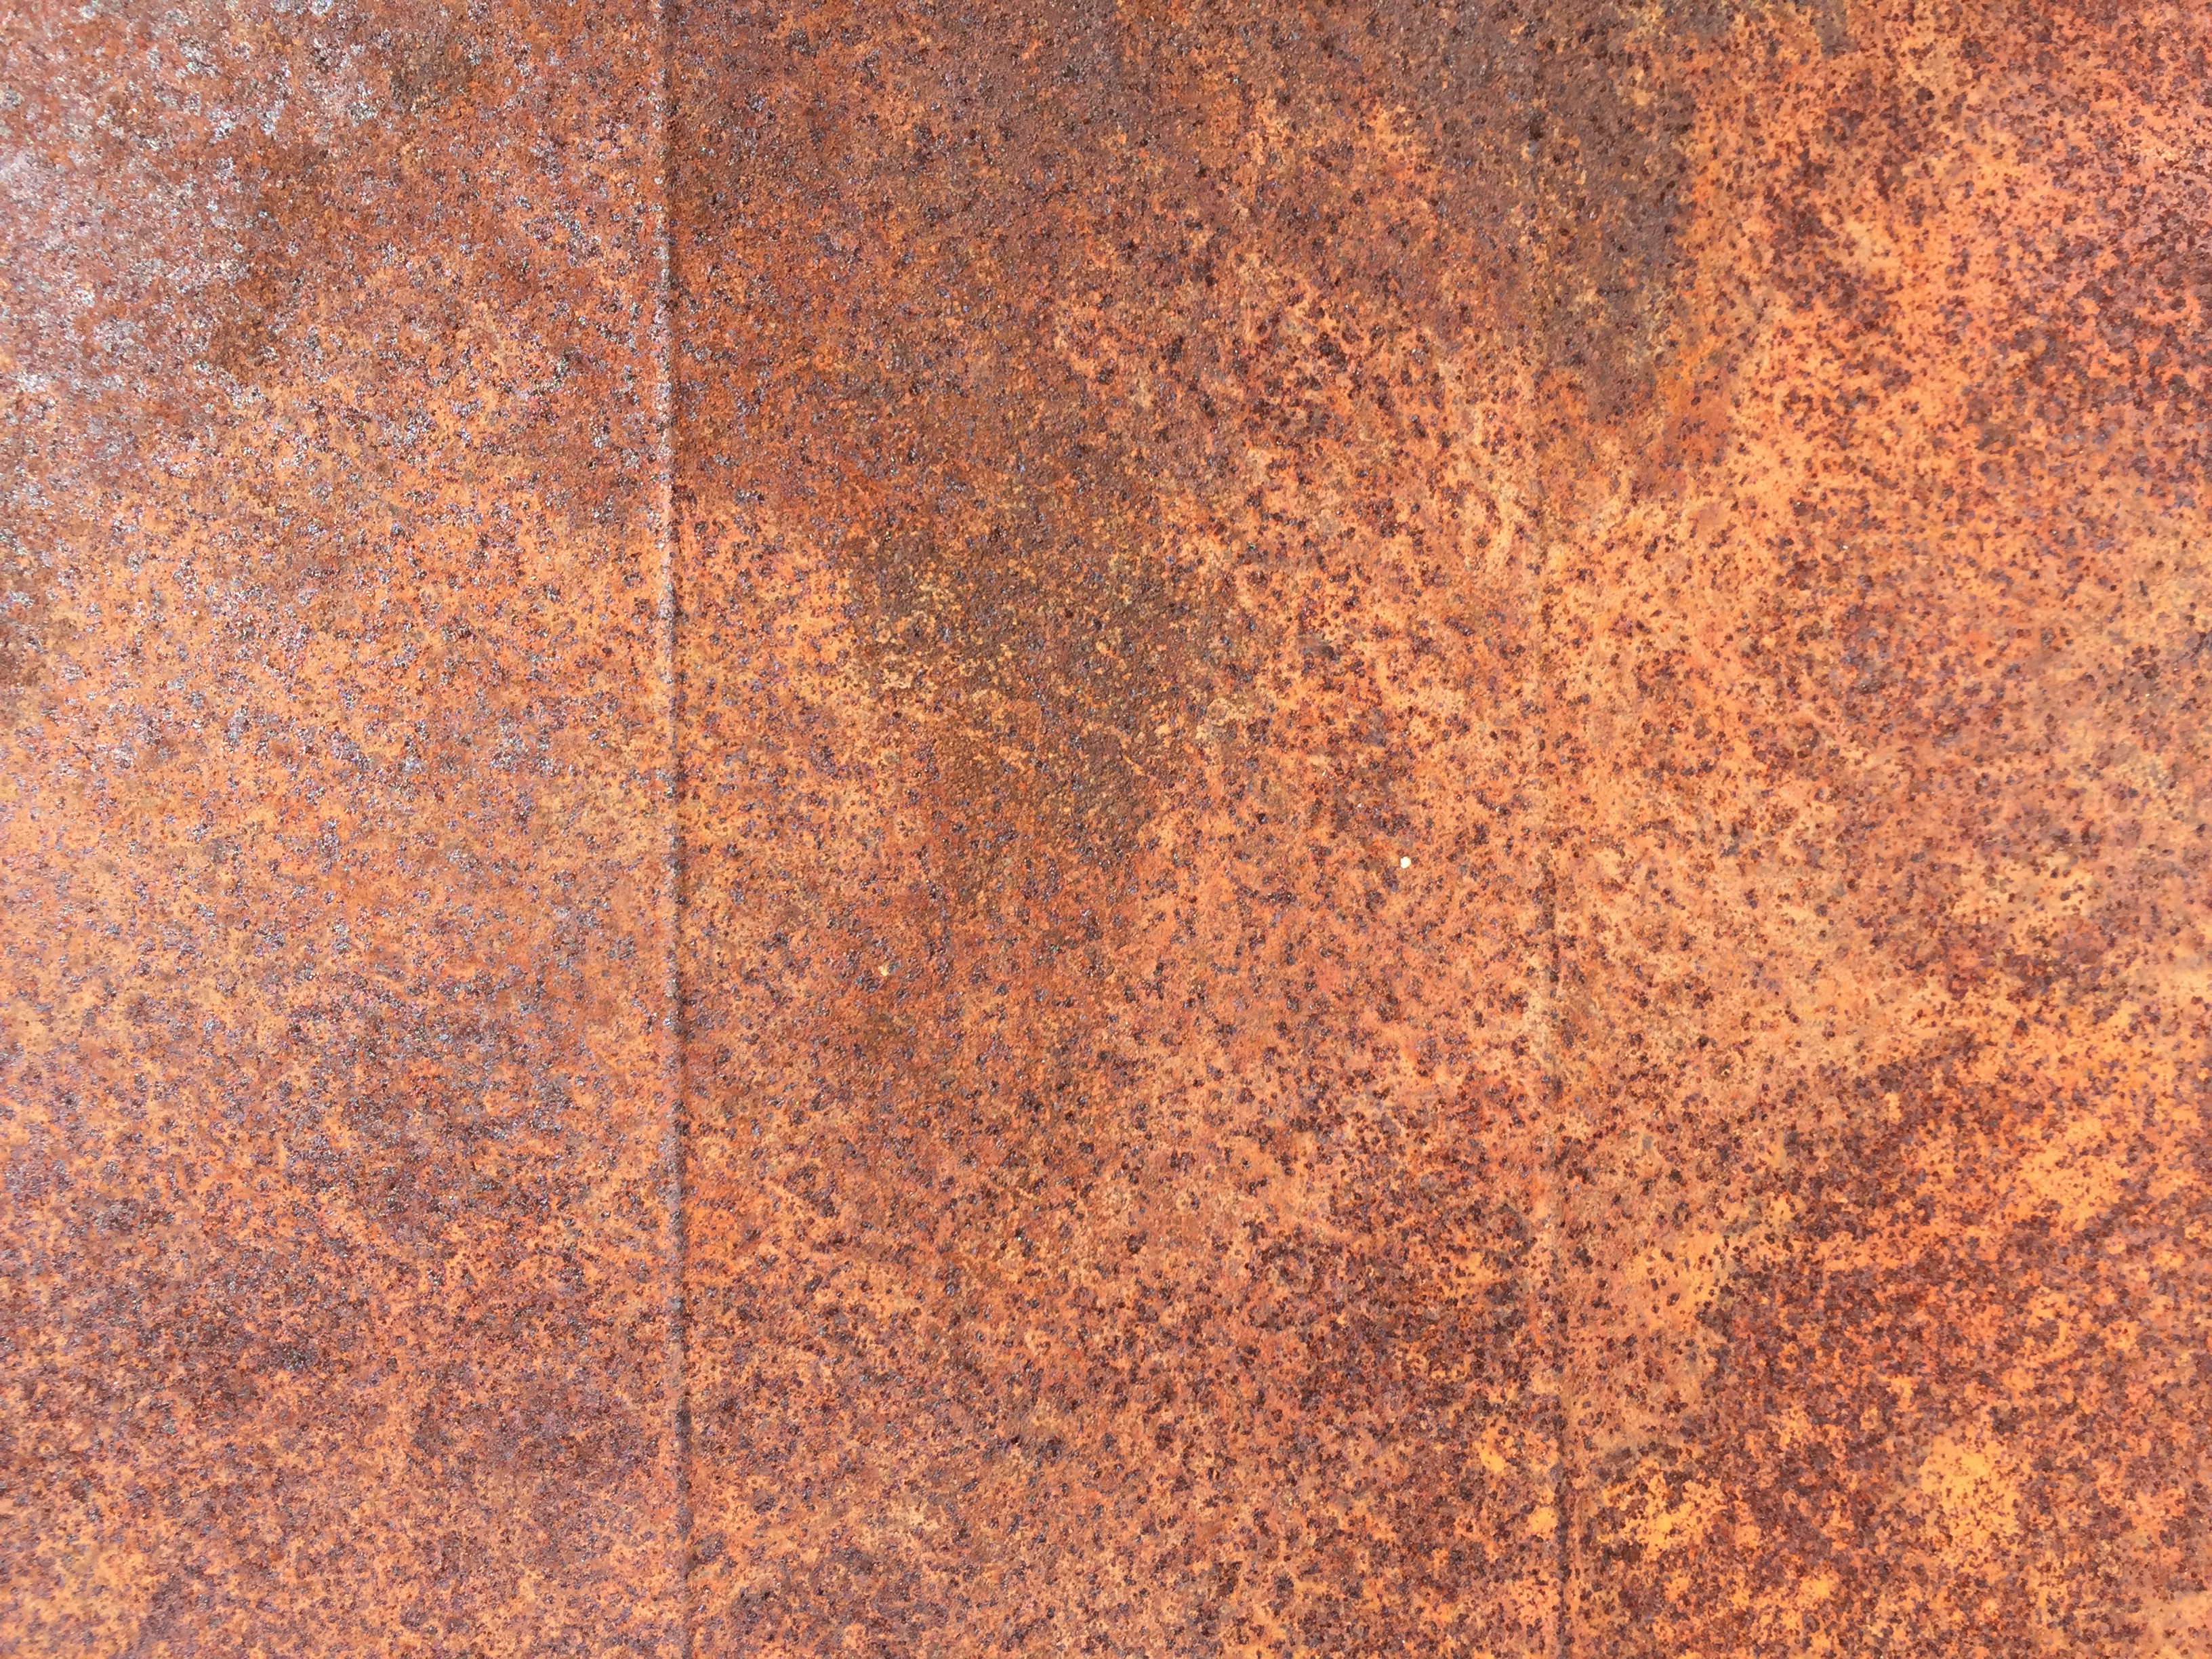 Rusted Metal Wall With Discoloration Featuring Shades Of Brown Free Textures